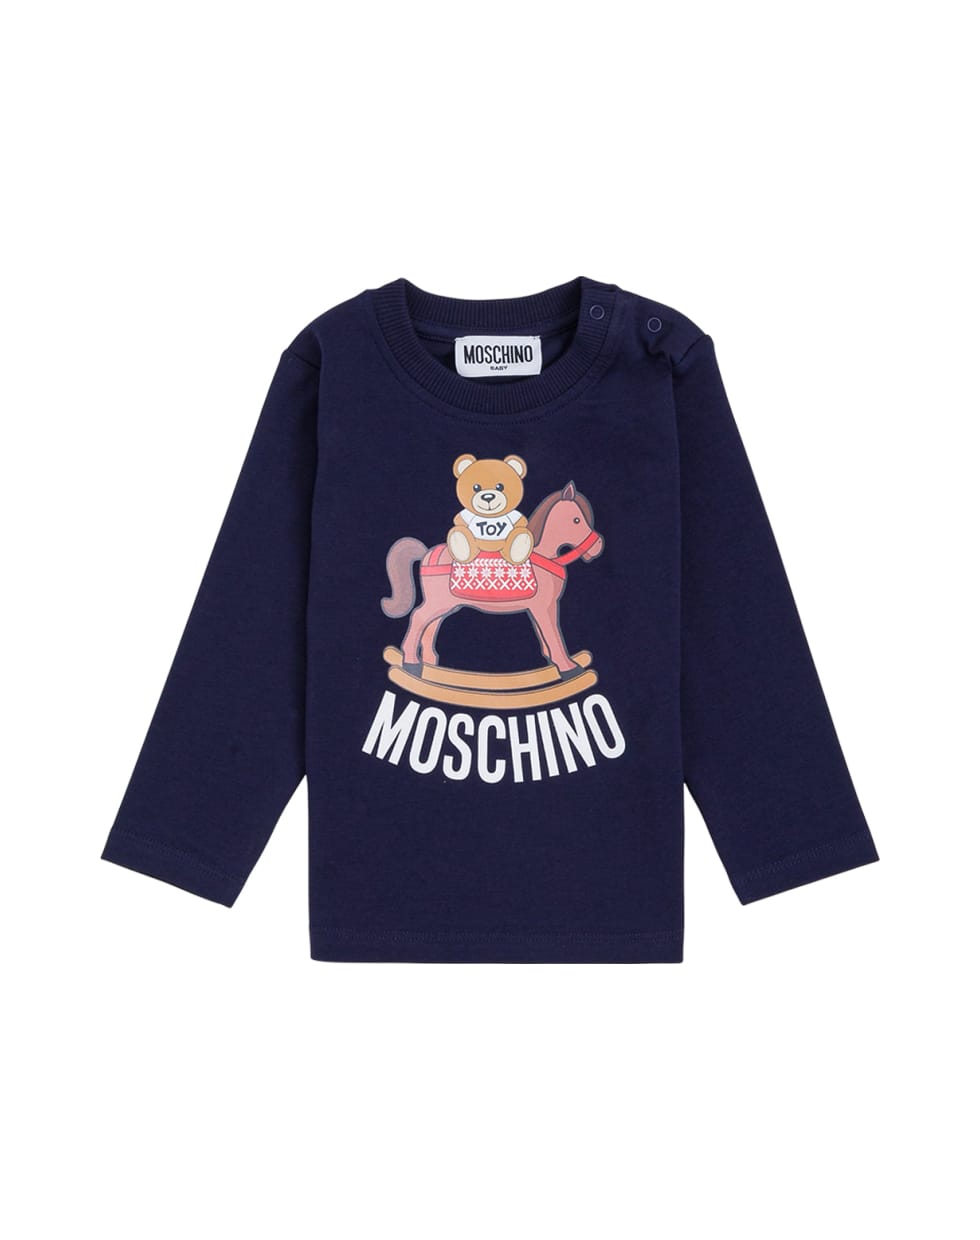 Moschino Long-sleeved T-shirt In Blue Cotton With Teddy Bear Print - Blu